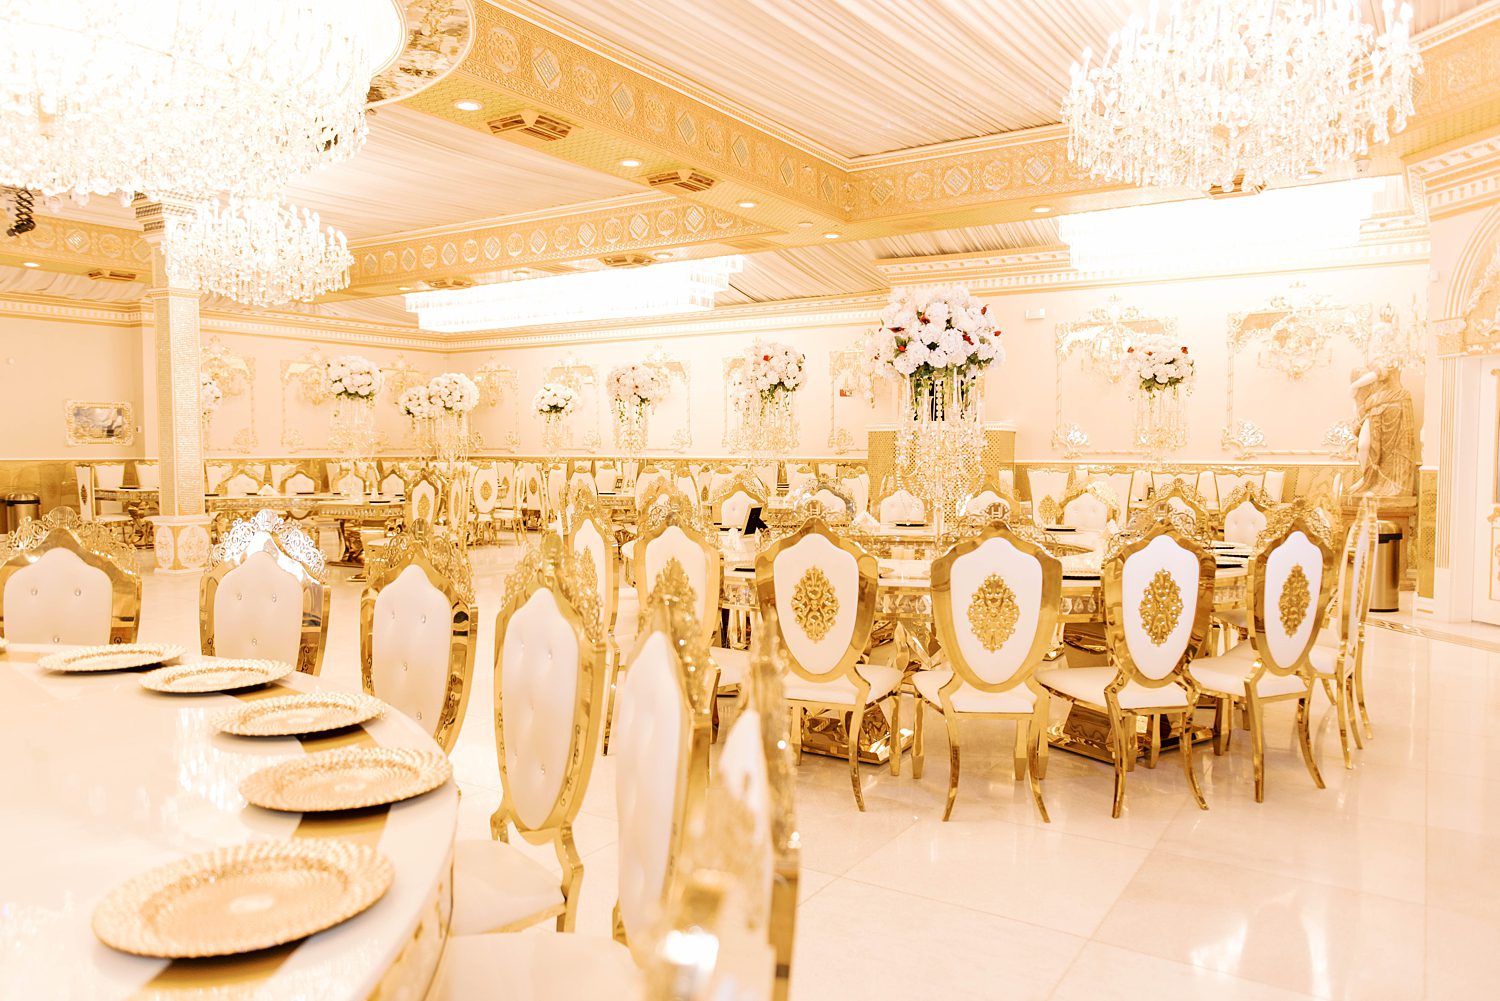 Chic Venue Golden Palace wedding reception with gold and white details 